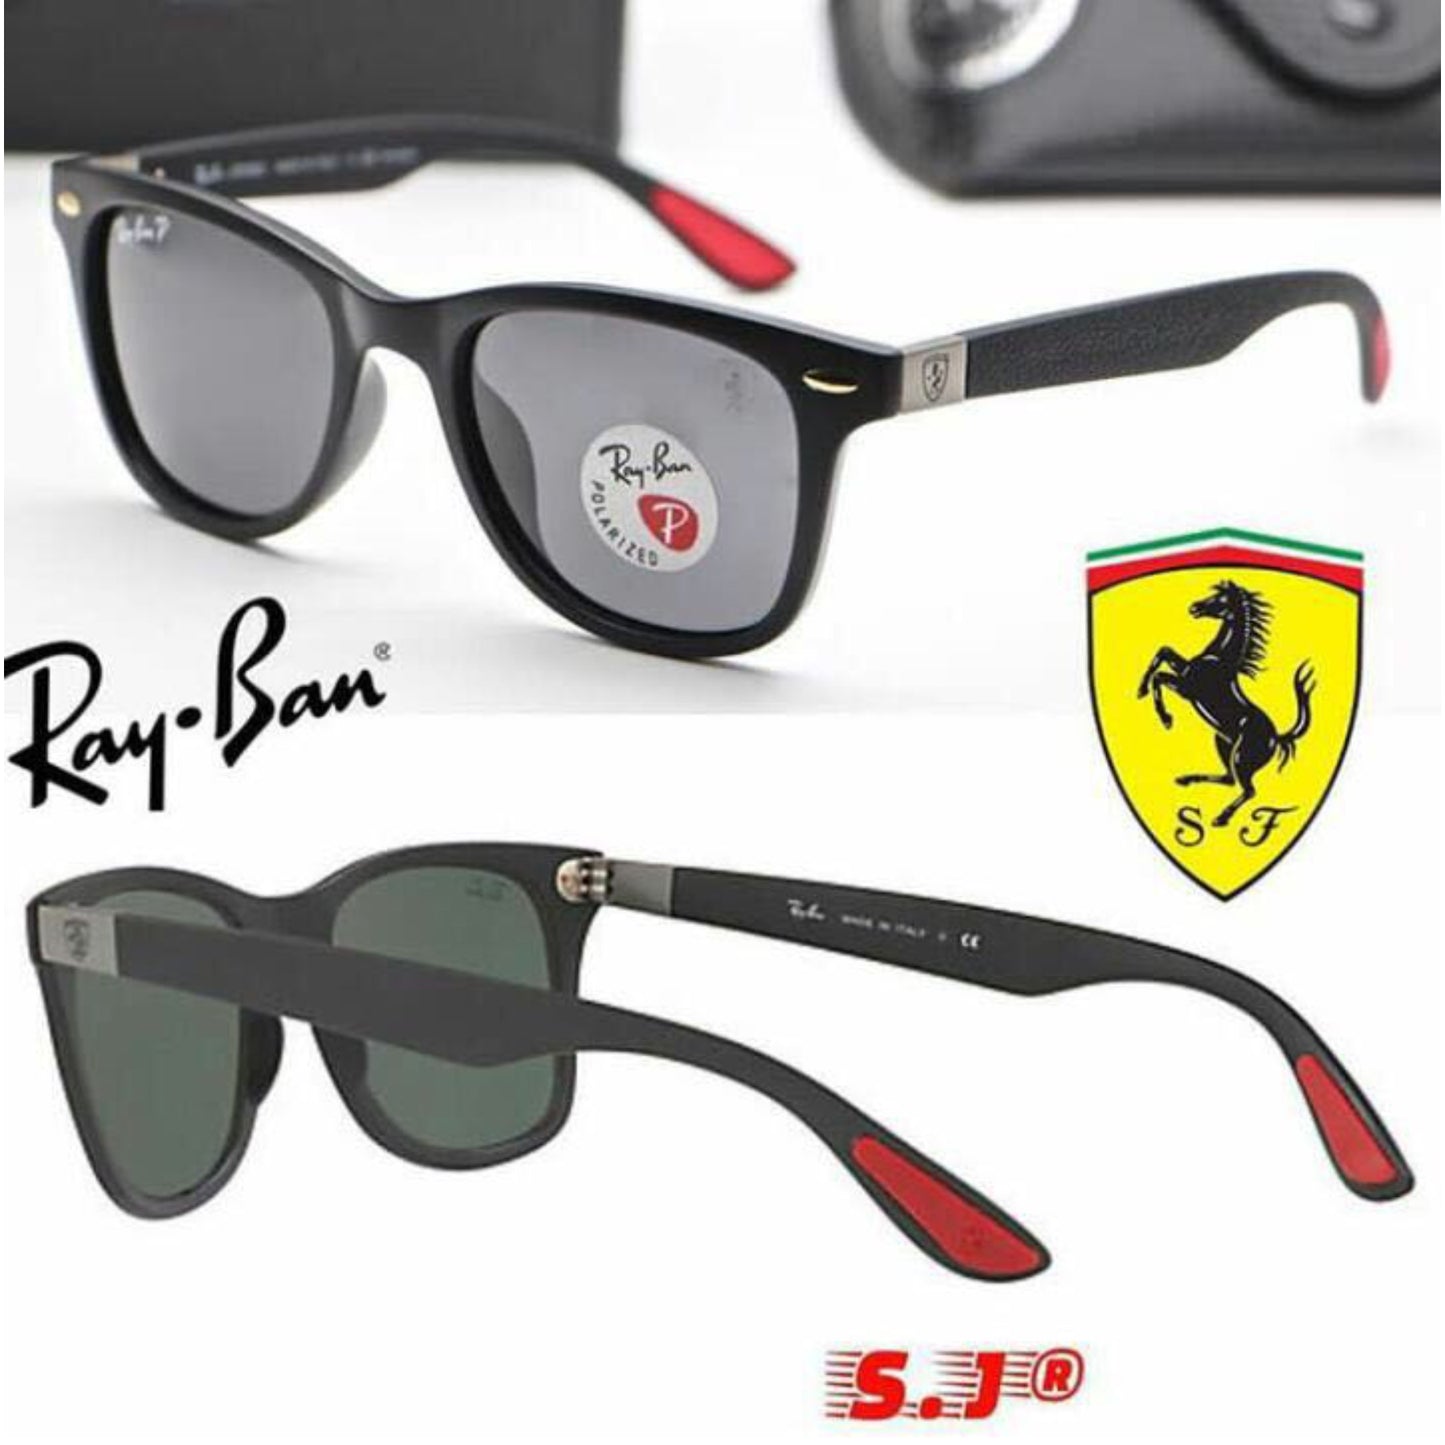 Latest Light Weight Trendy Hot Favorite All Season Special Ray Ban Fancy Sunglass For Daily Causal Evergreen UV Protected For Unisex.